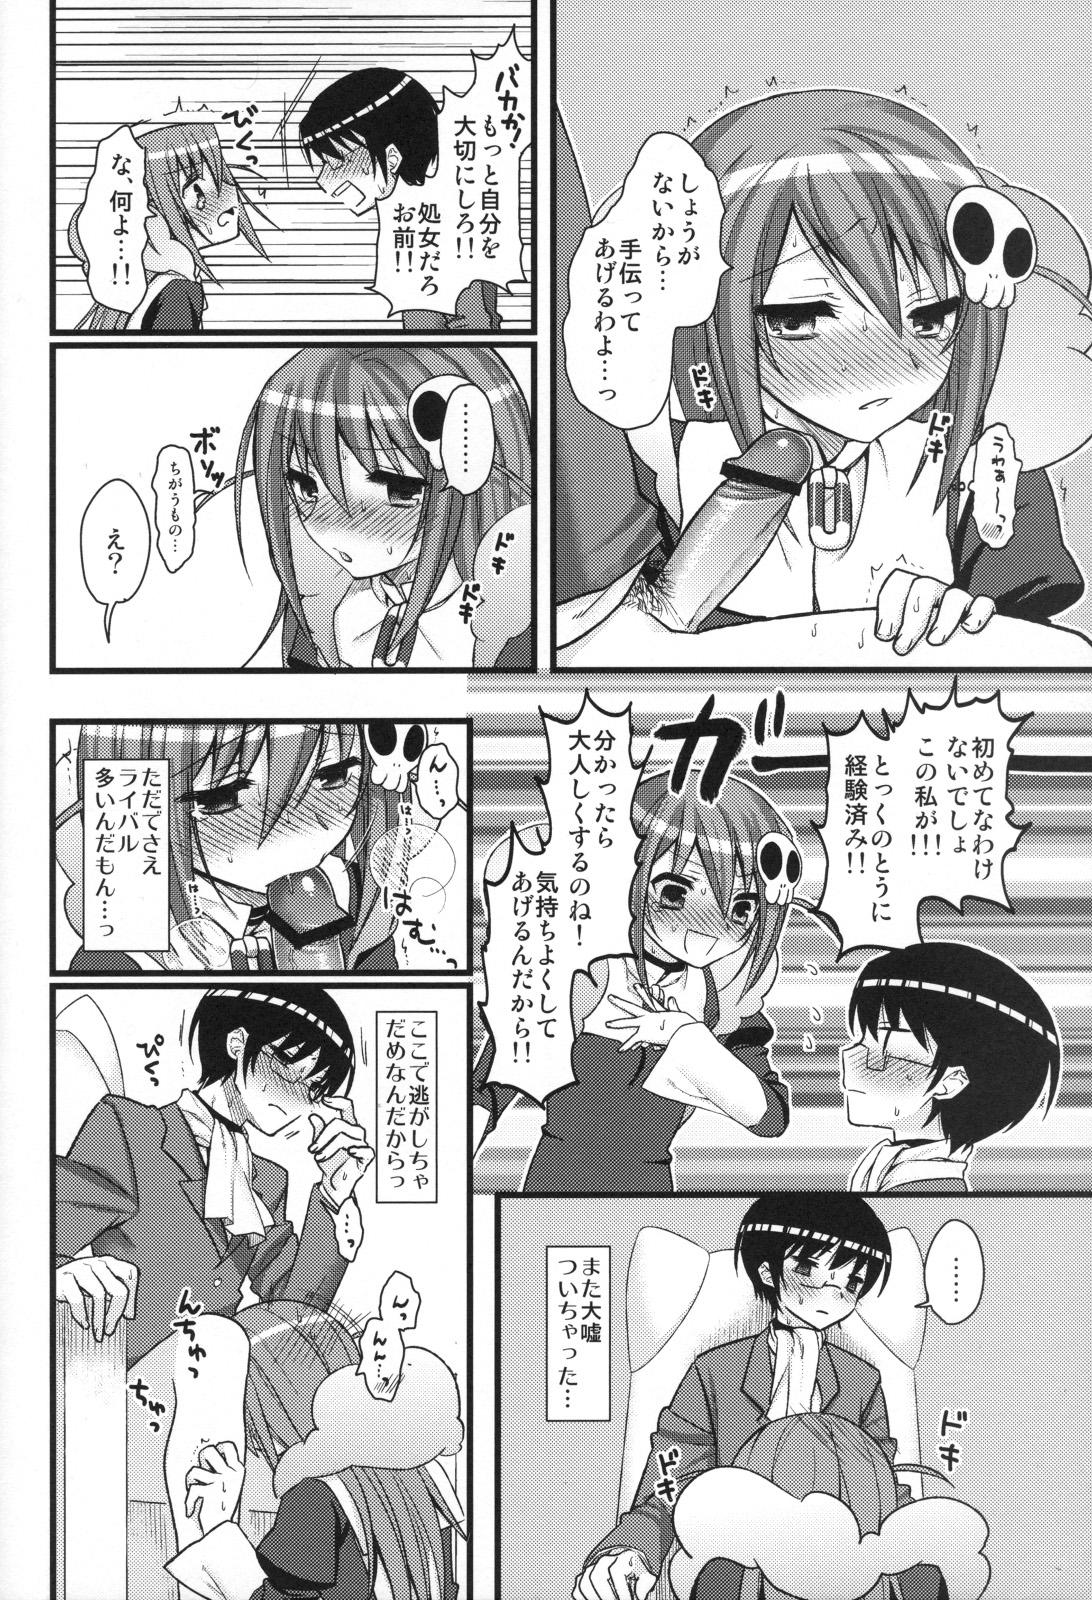 Moneytalks EXP.04 - The world god only knows 18 Porn - Page 7